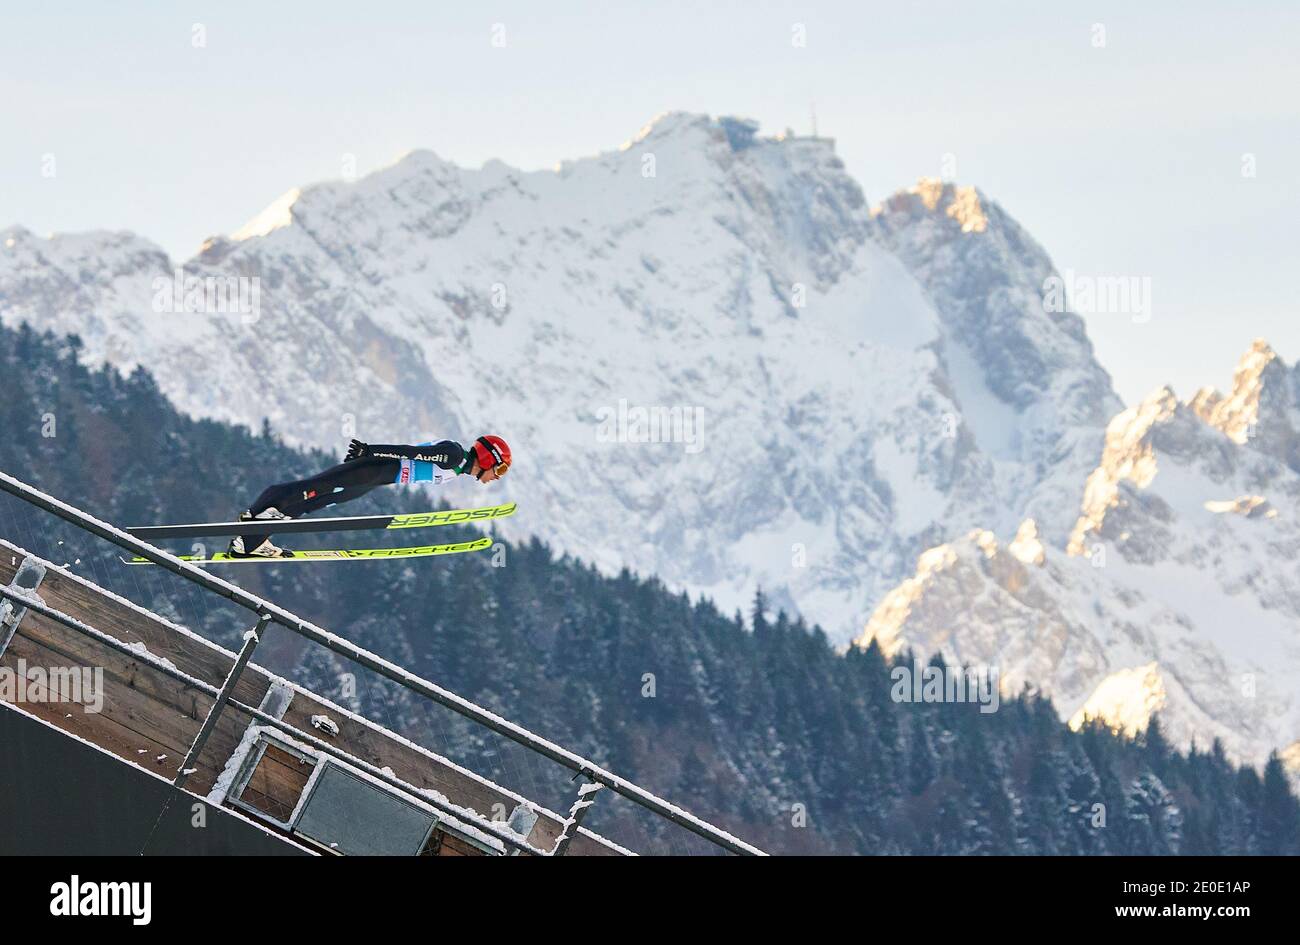 In front of Zugspitze mountain: Richard FREITAG, GER in action at the Four Hills Tournament Ski Jumping at Olympic Stadium, Grosse Olympiaschanze in Garmisch-Partenkirchen, Bavaria, Germany, December 31, 2020.  © Peter Schatz / Alamy Live News Stock Photo